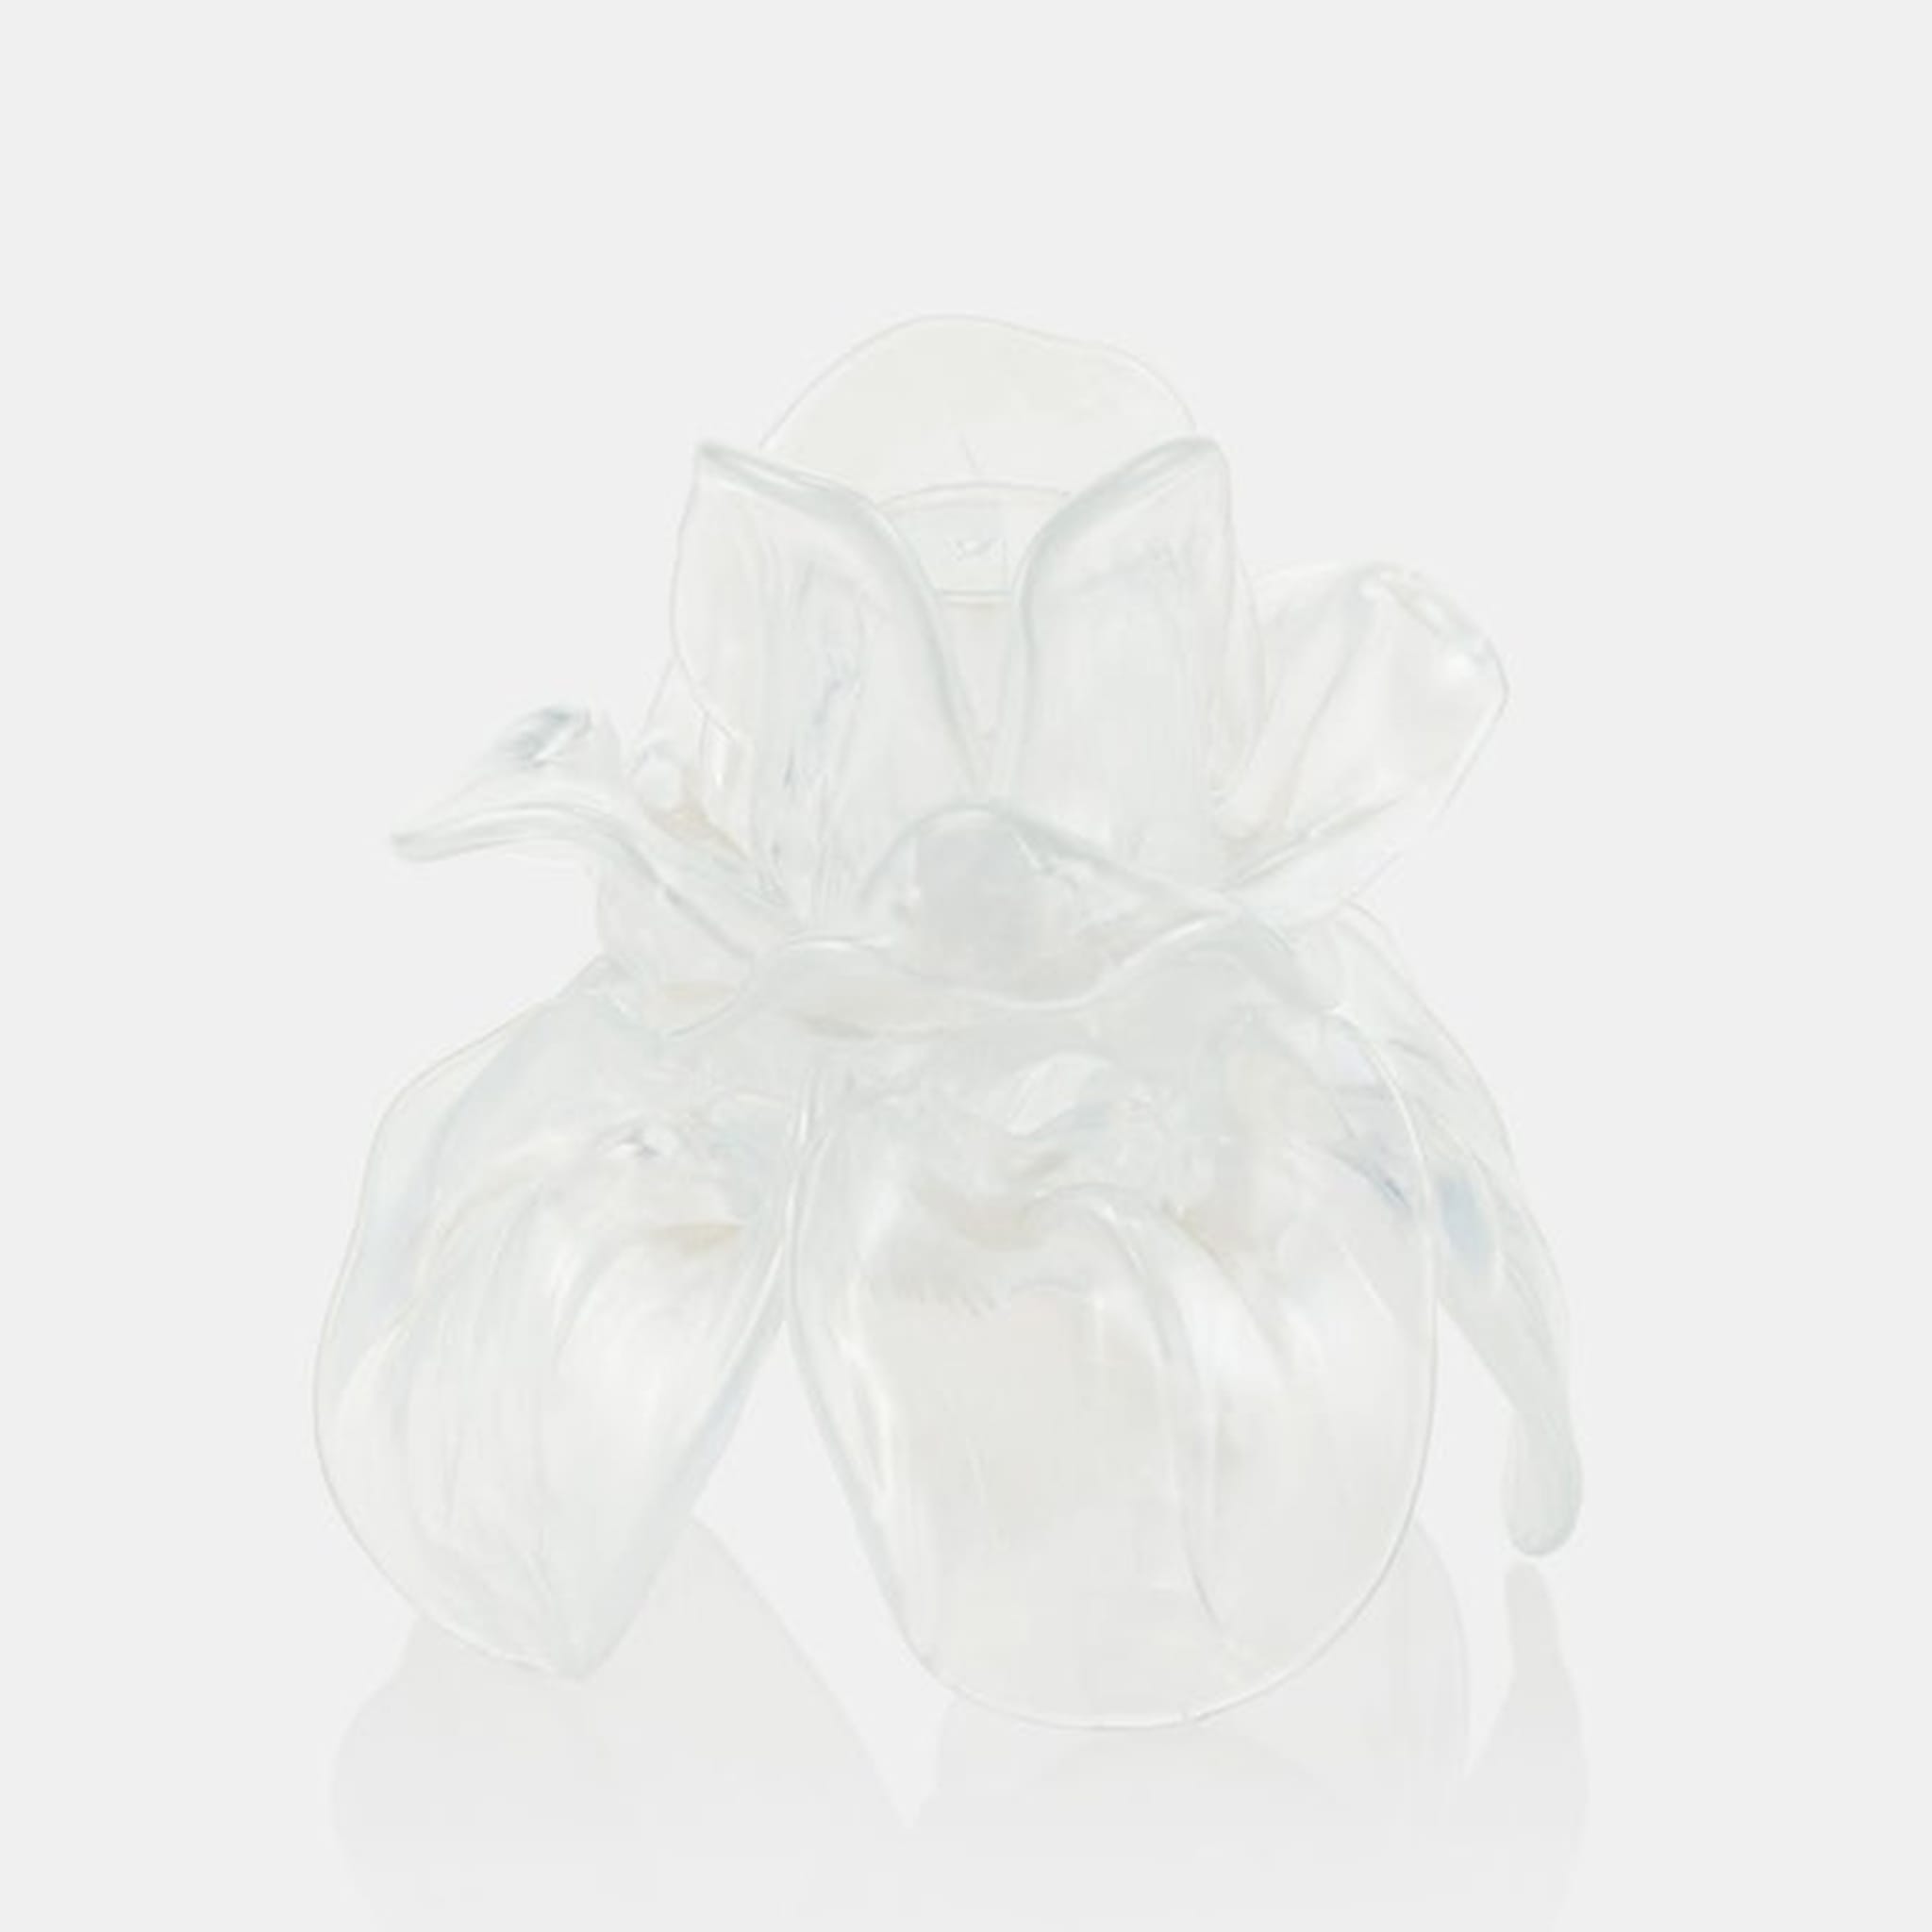 Peony White Multilayered Mouth-Blown Candle Holder  - Alternative view 2